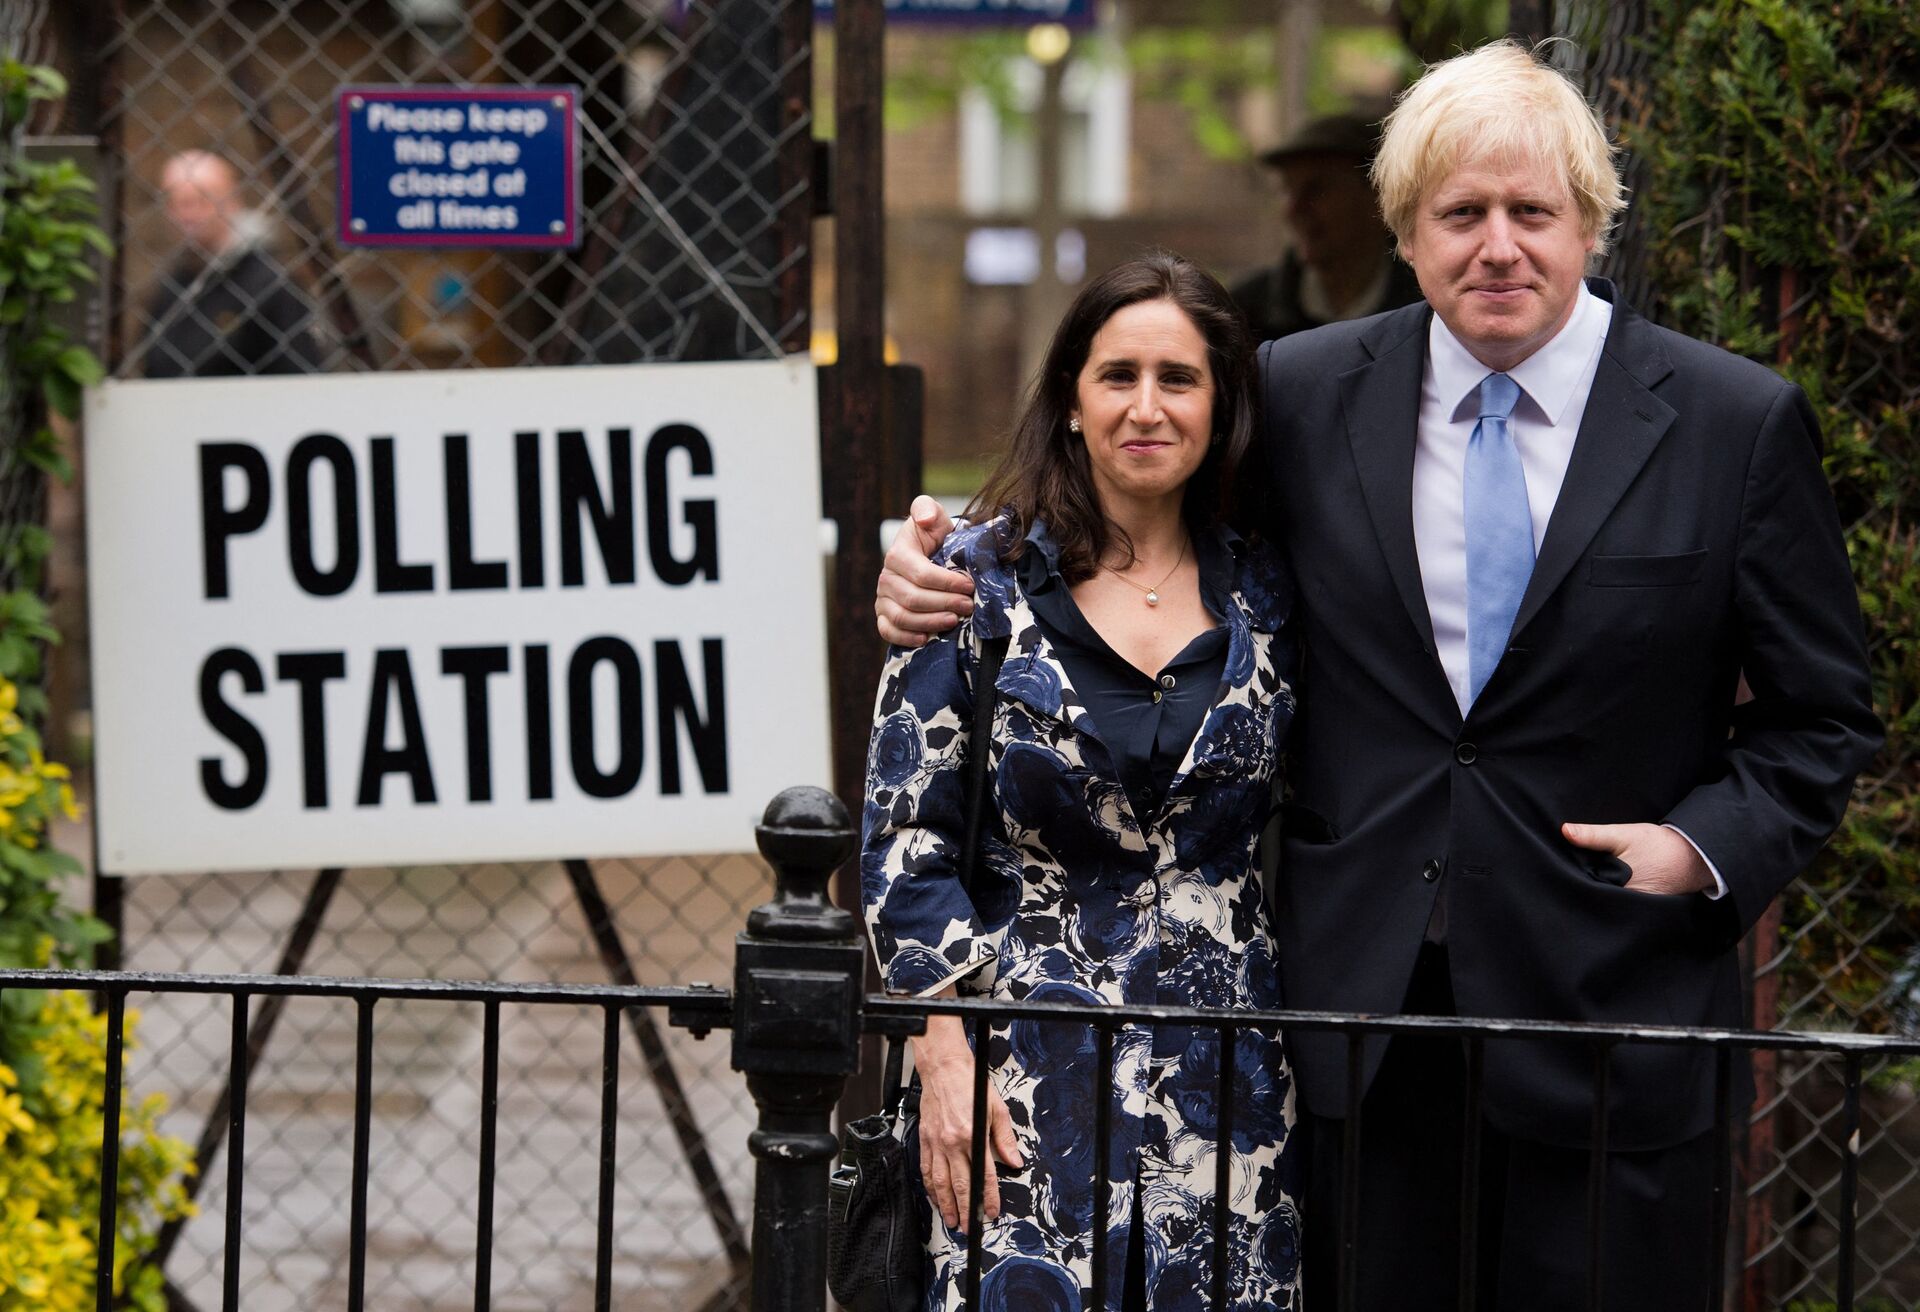 London Mayor Boris Johnson (R) stands with his wife Marina Wheeler (L) after casting his vote in the local elections - Sputnik International, 1920, 09.12.2021